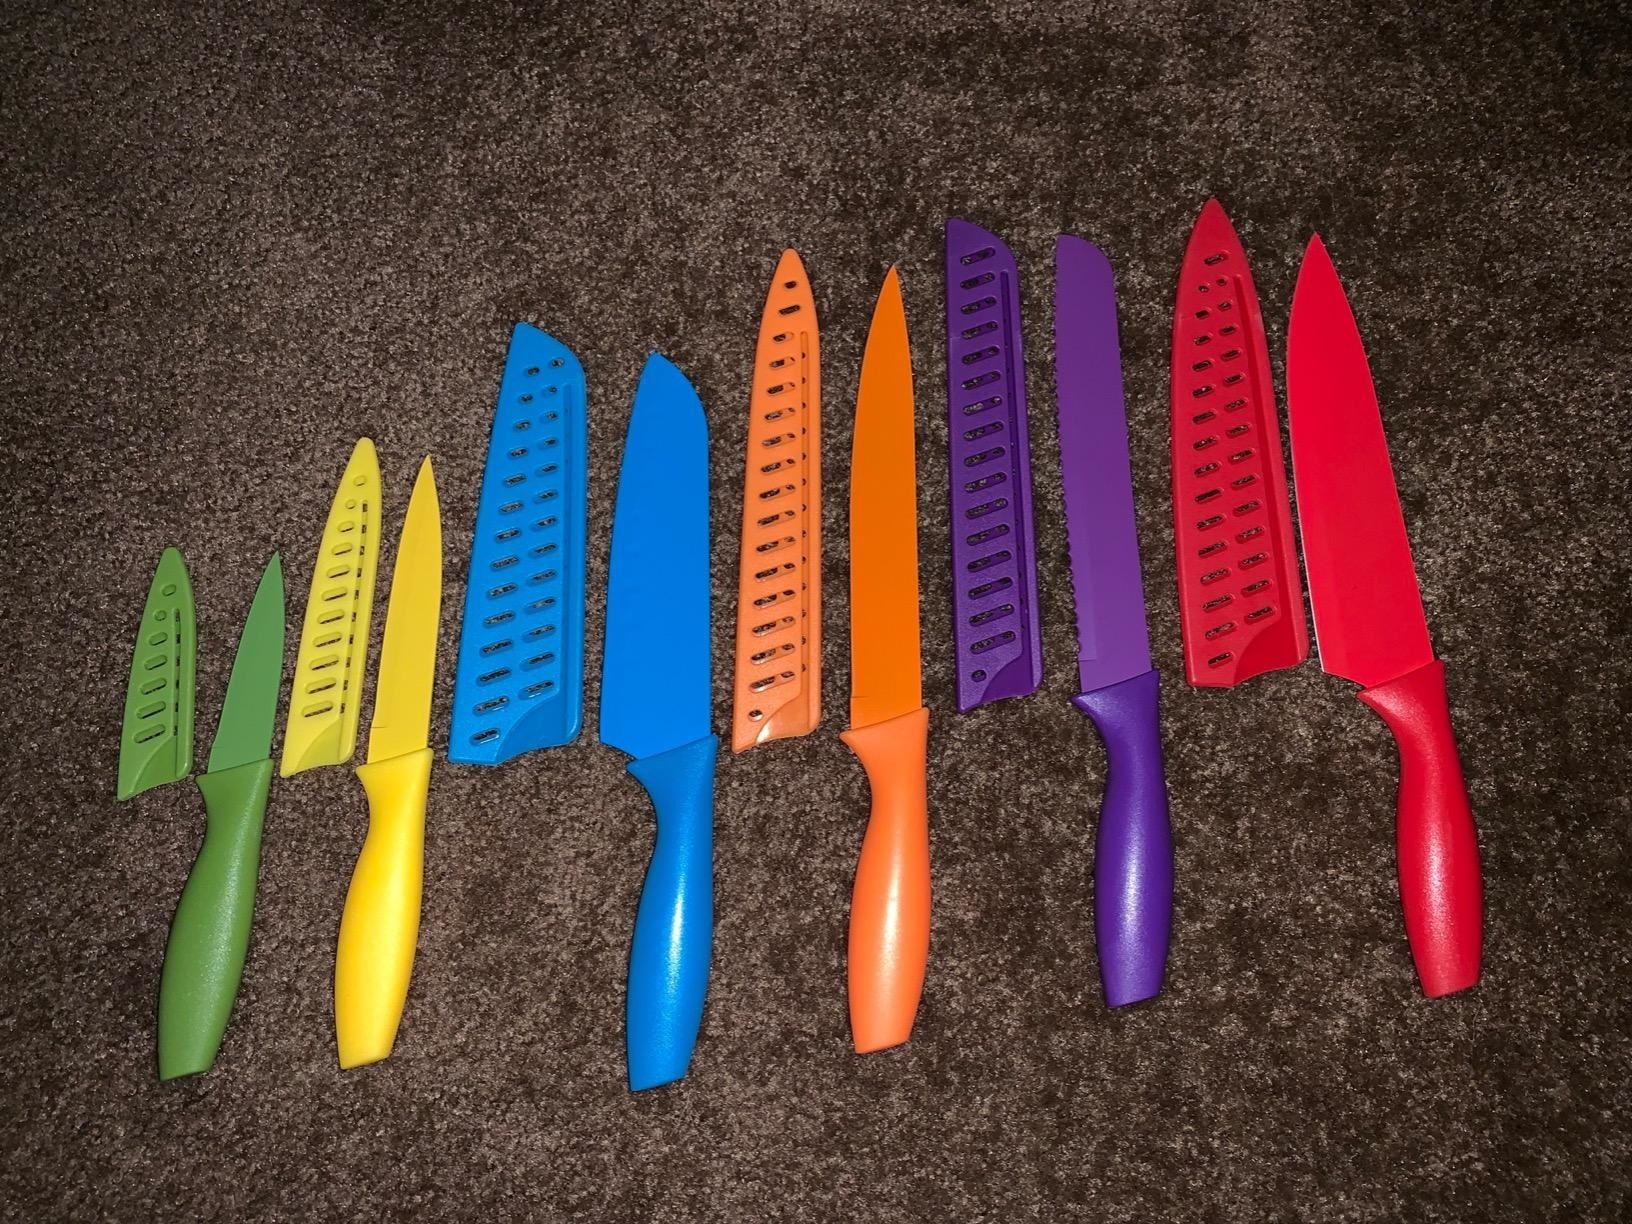 A reviewer photo of the knives, laid out with their covers